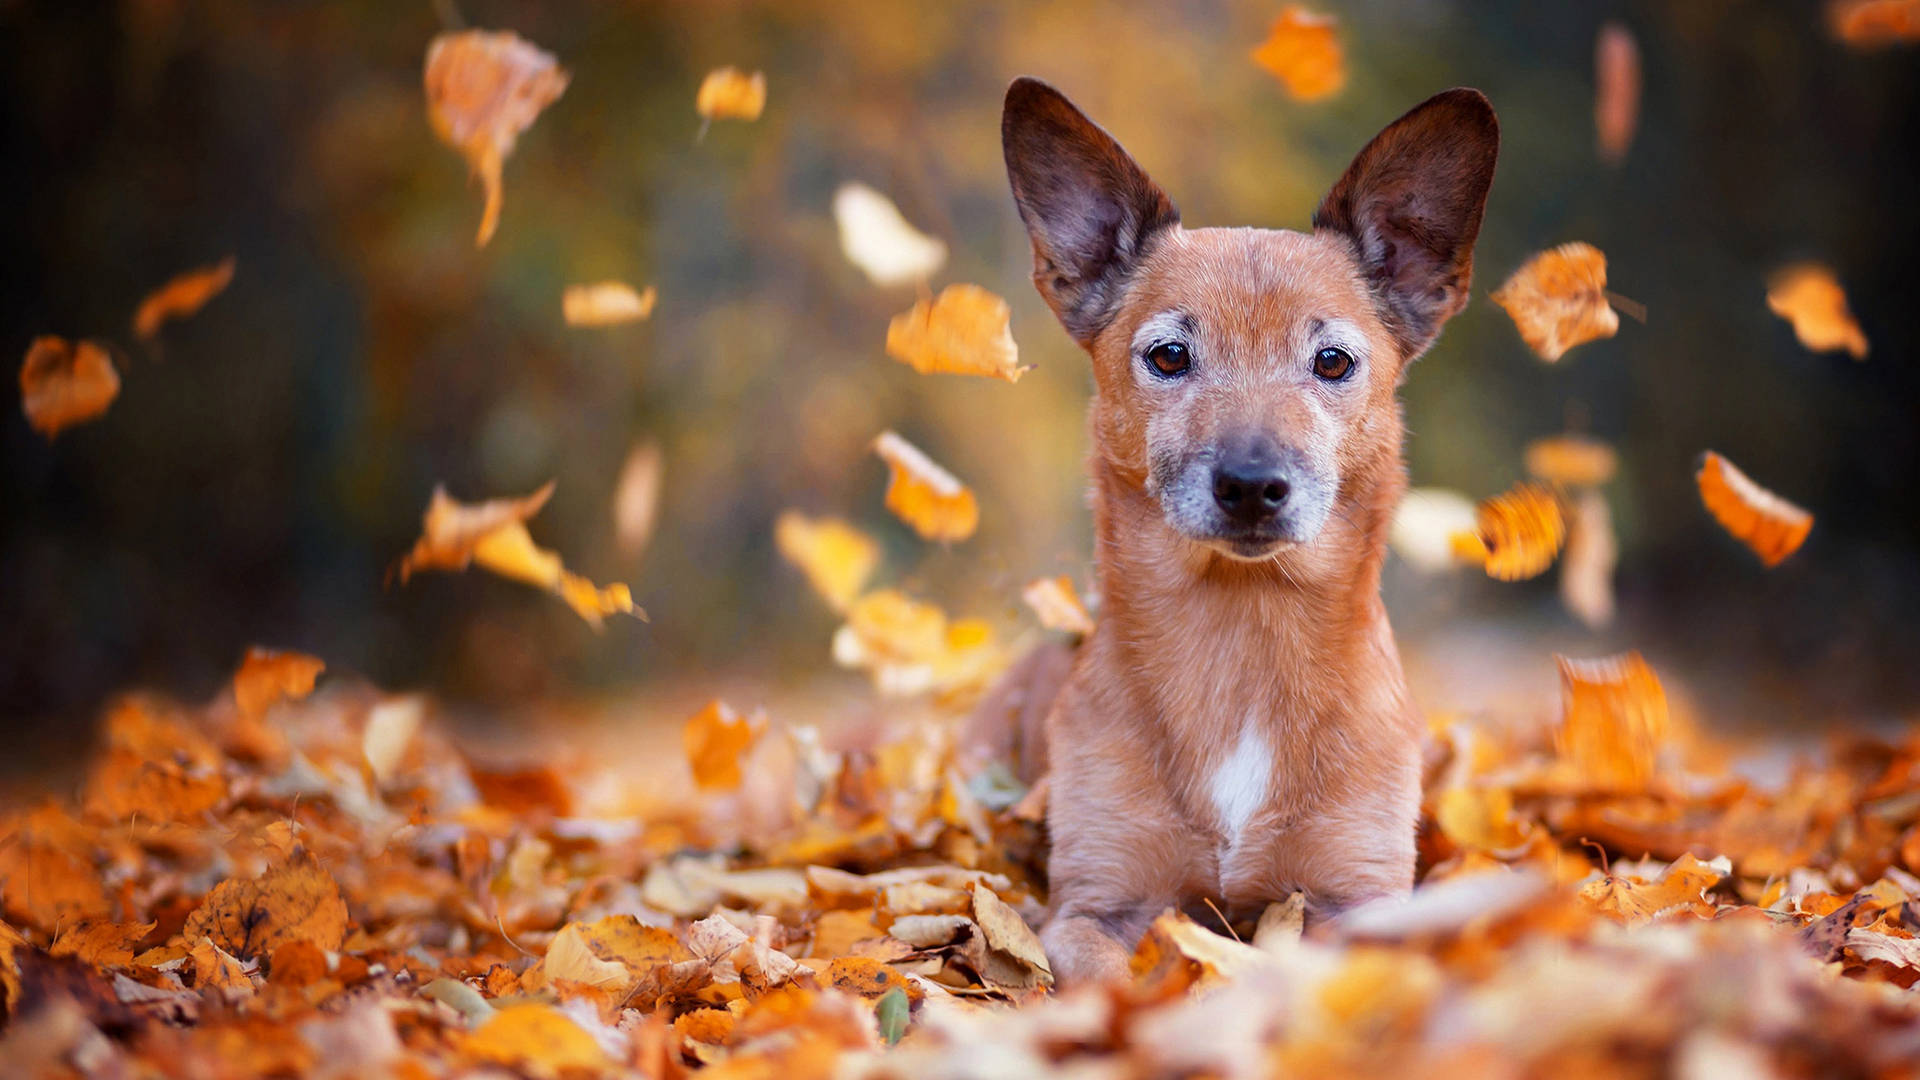 Cute Red Dog On Autumn Leaves